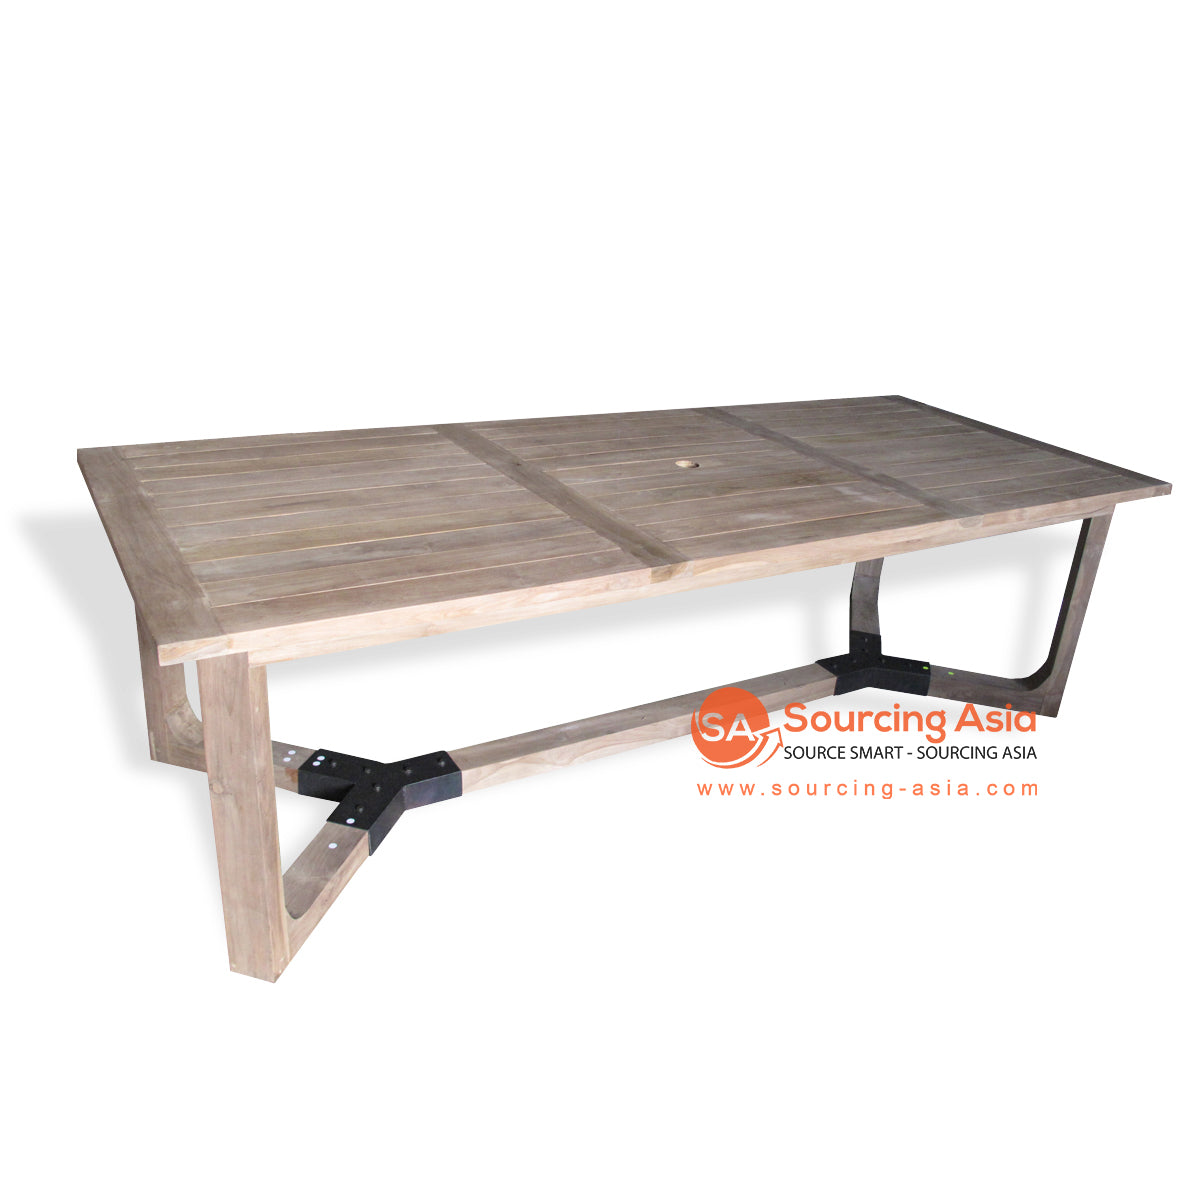 ECL036 LIGHT WHITE WASH RECYCLED TEAK WOOD OUTDOOR DINING TABLE WITH STAINLESS JOINS